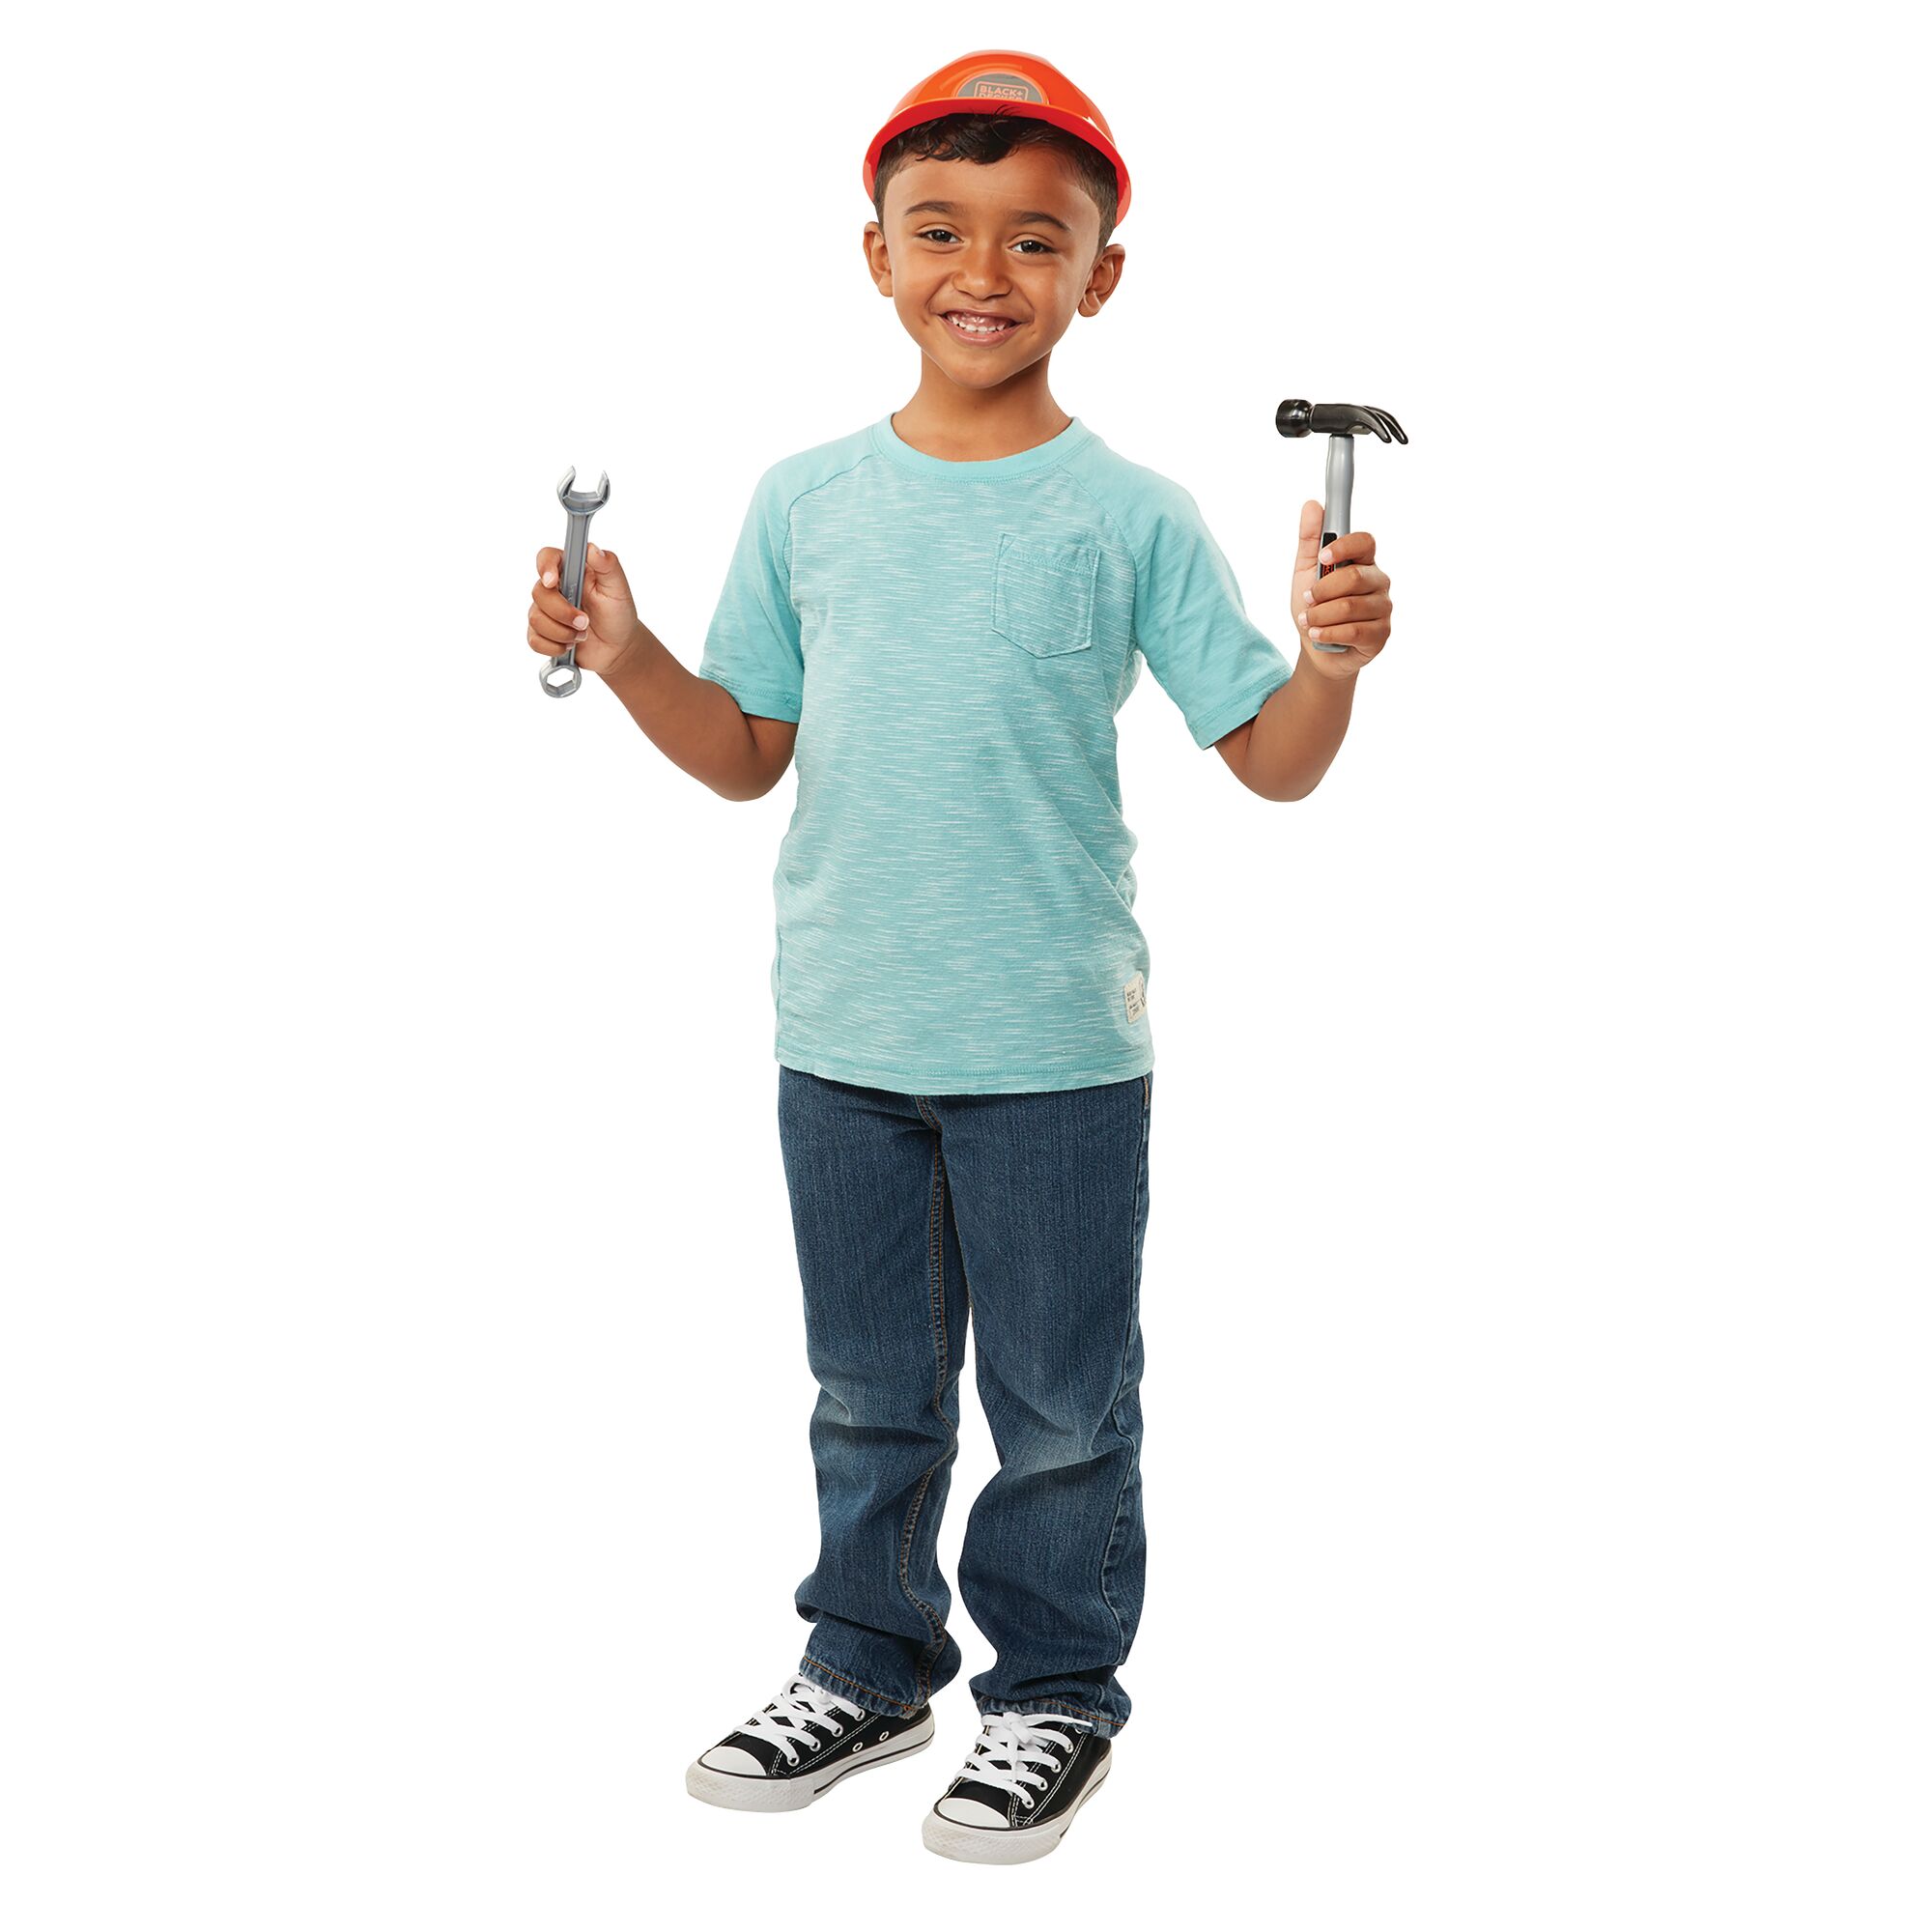 Junior 12 pieces Carpenter Dress Up Set with Toy Tools being held by child in hand.